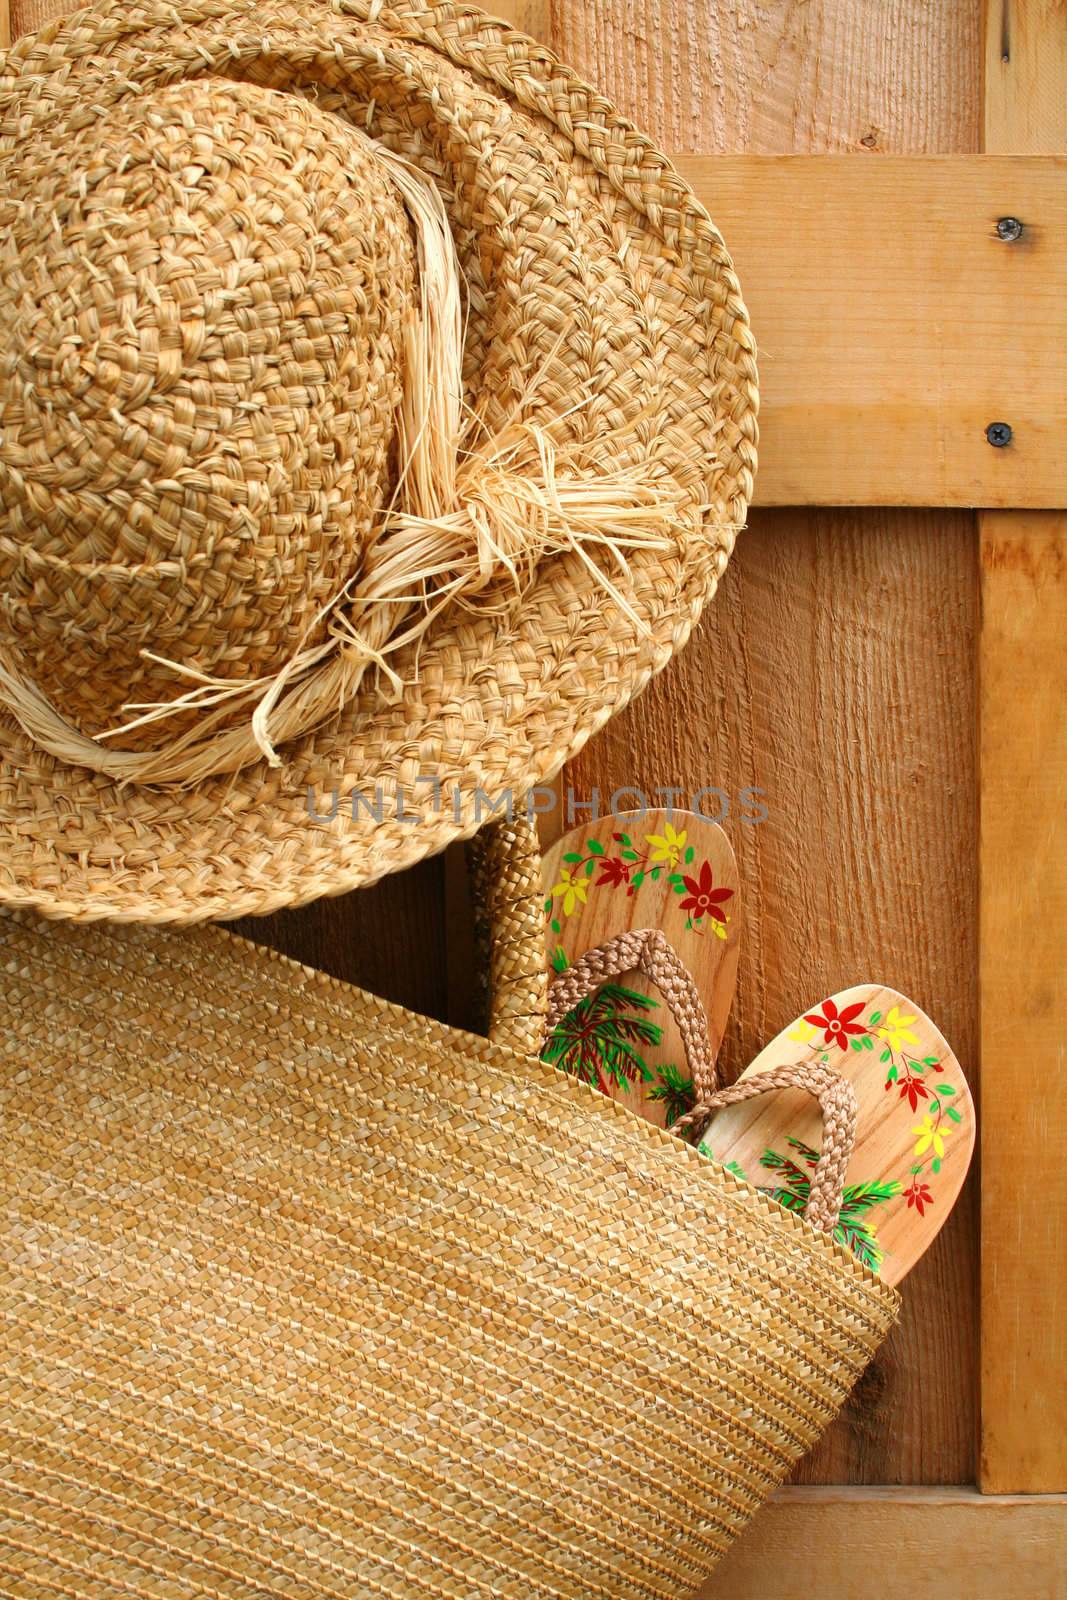 Pair of sandals hanging out of wicker purse  by Sandralise